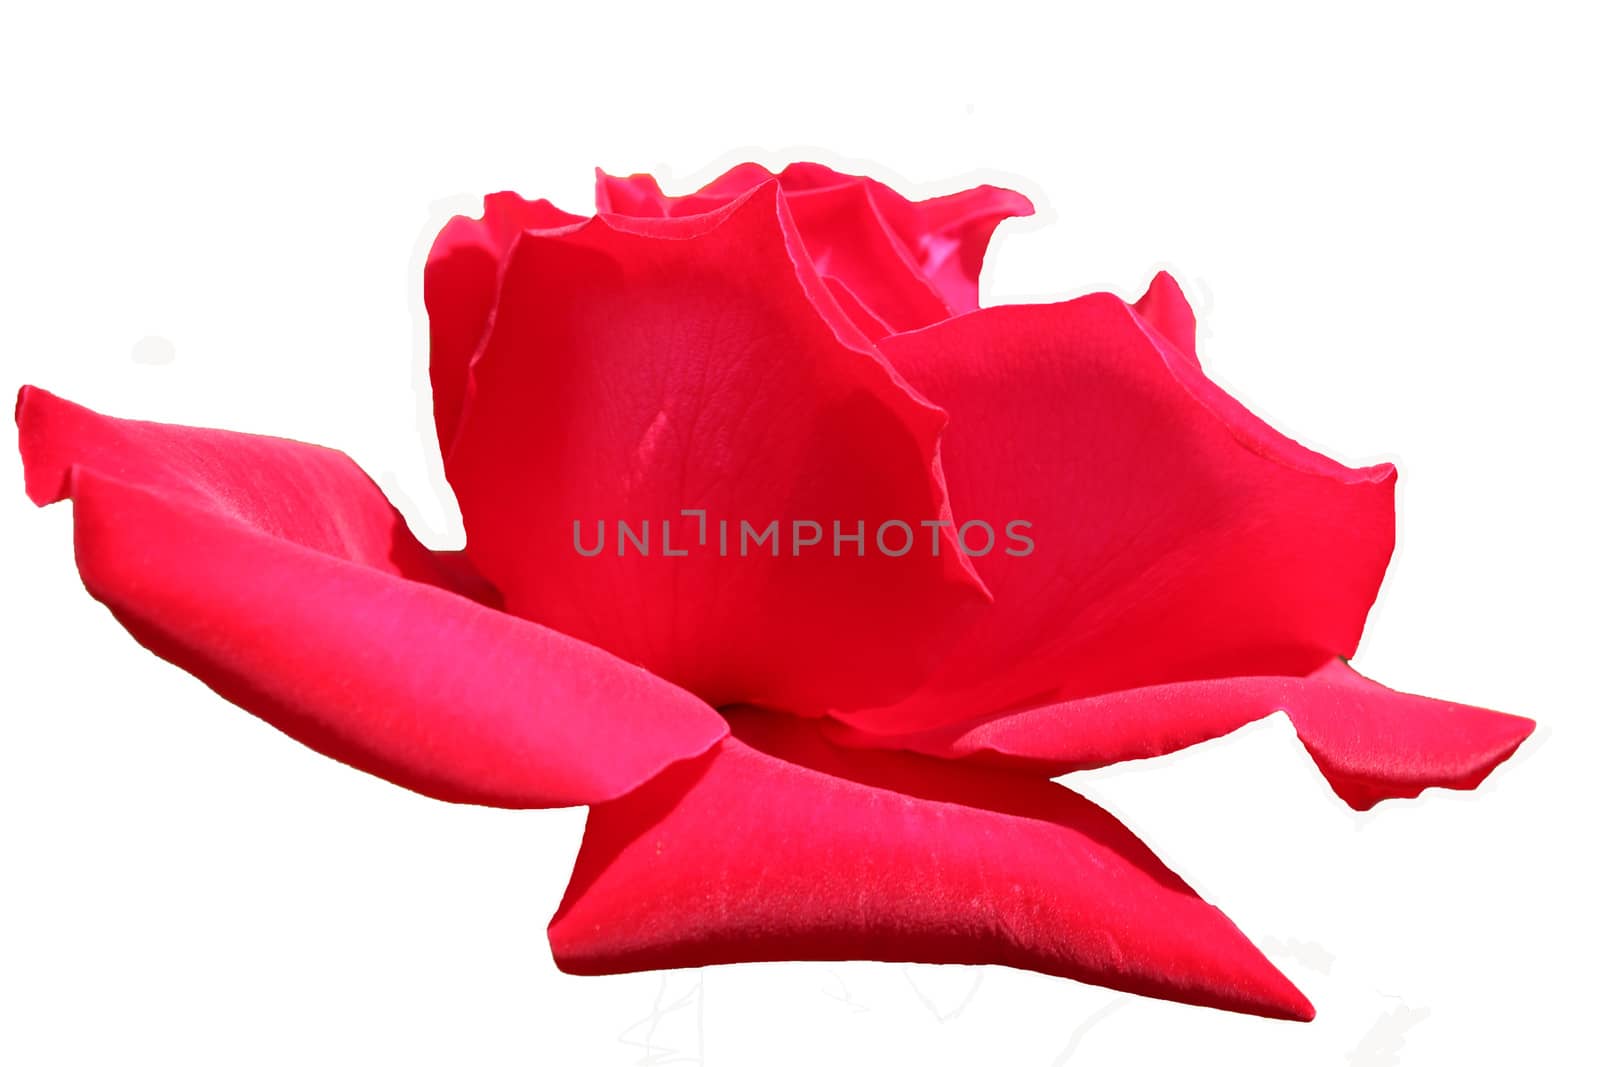 Close-up image of a red flower on a white background.